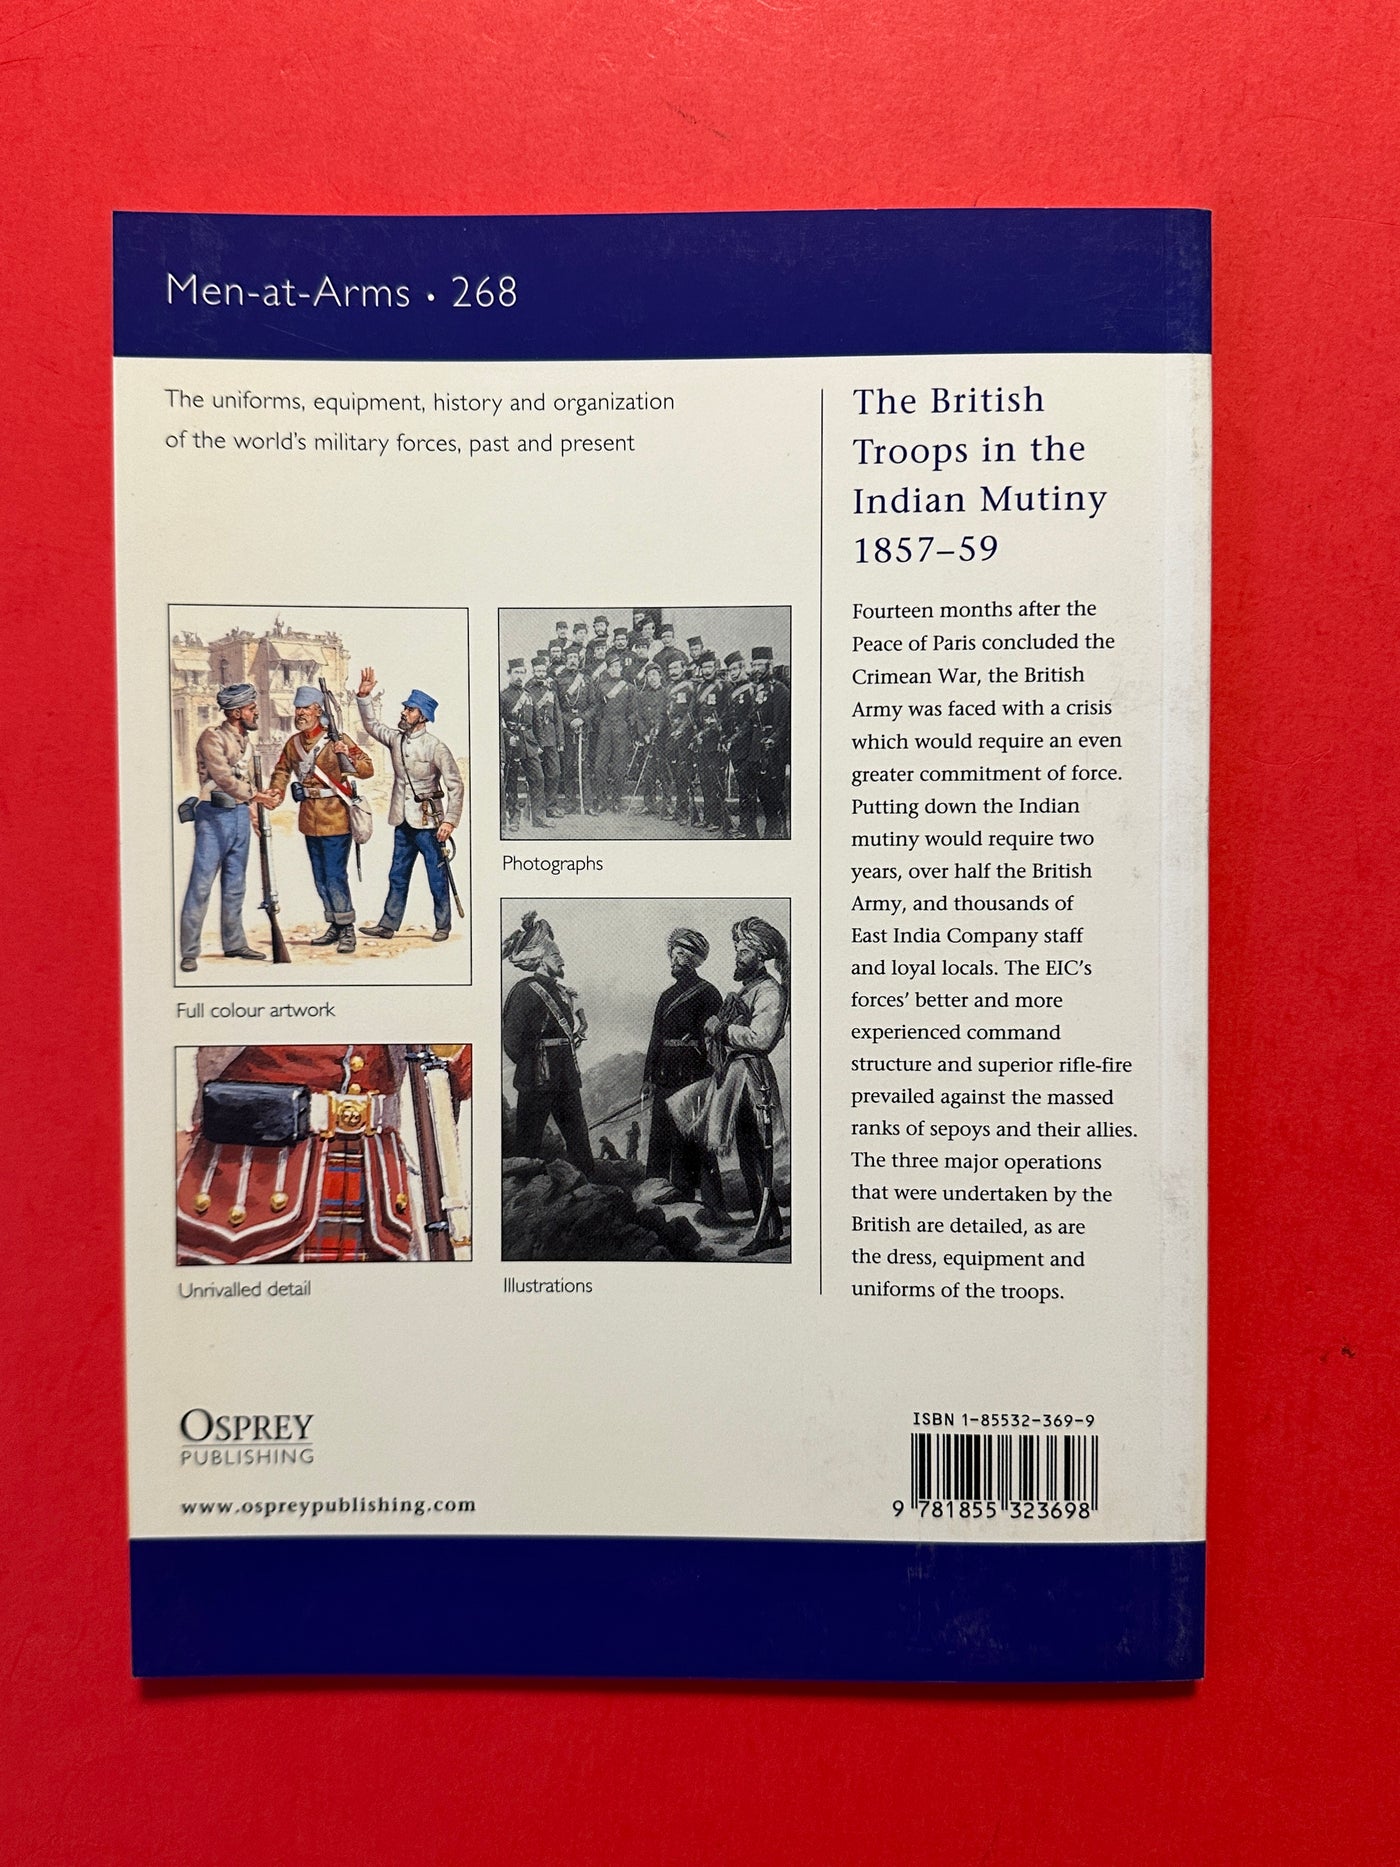 The British Troops in the Indian Mutiny 1857-59 (OUT OF PRINT)